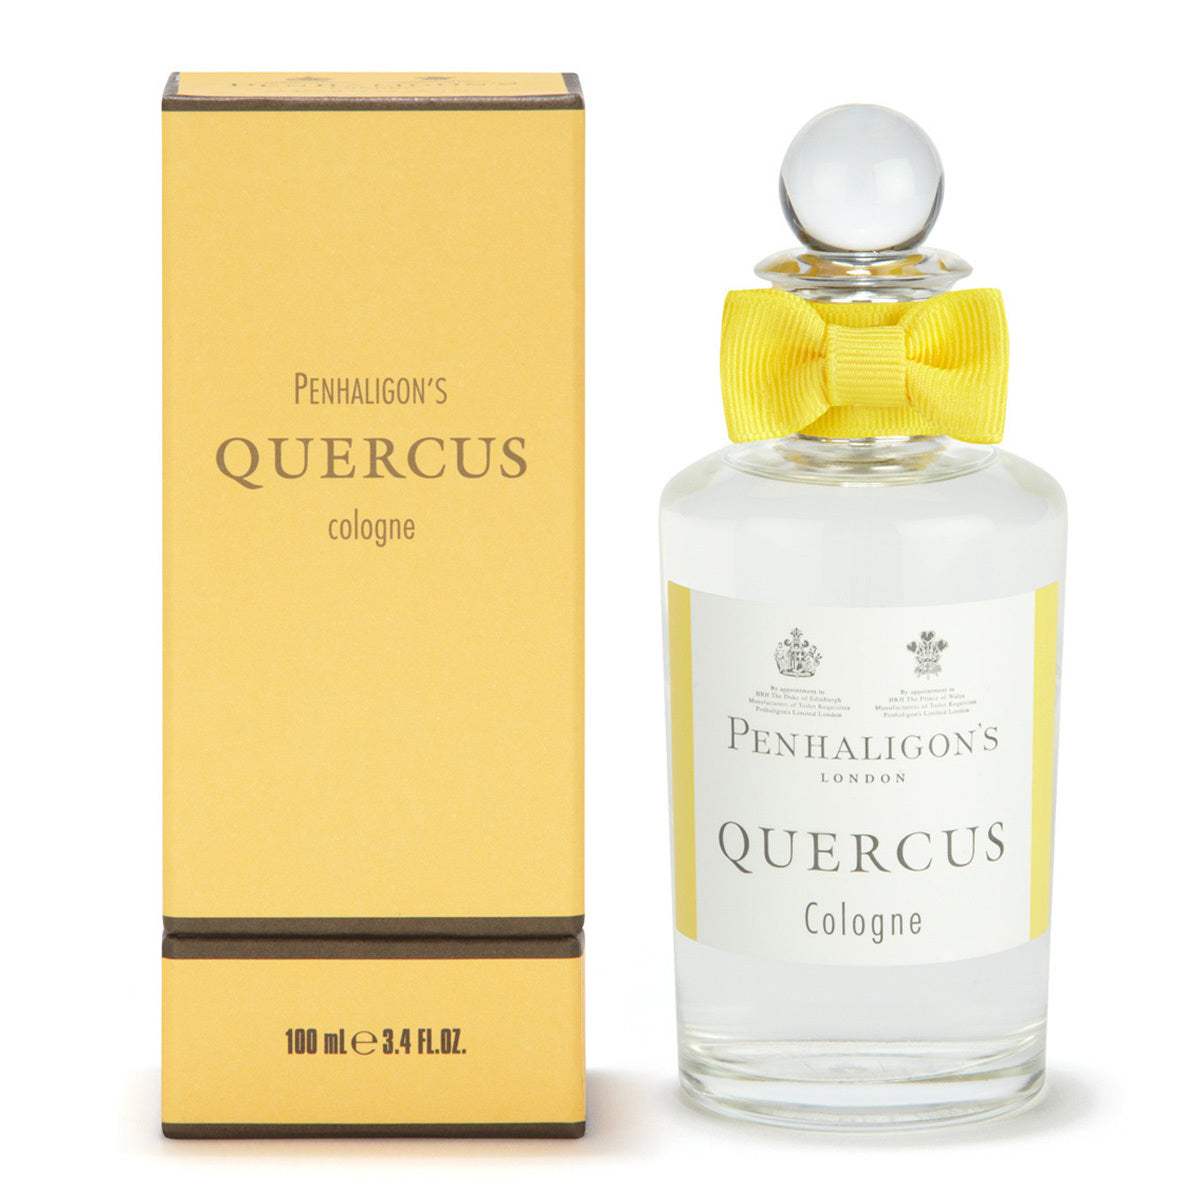 Primary image of Quercus Cologne Spray